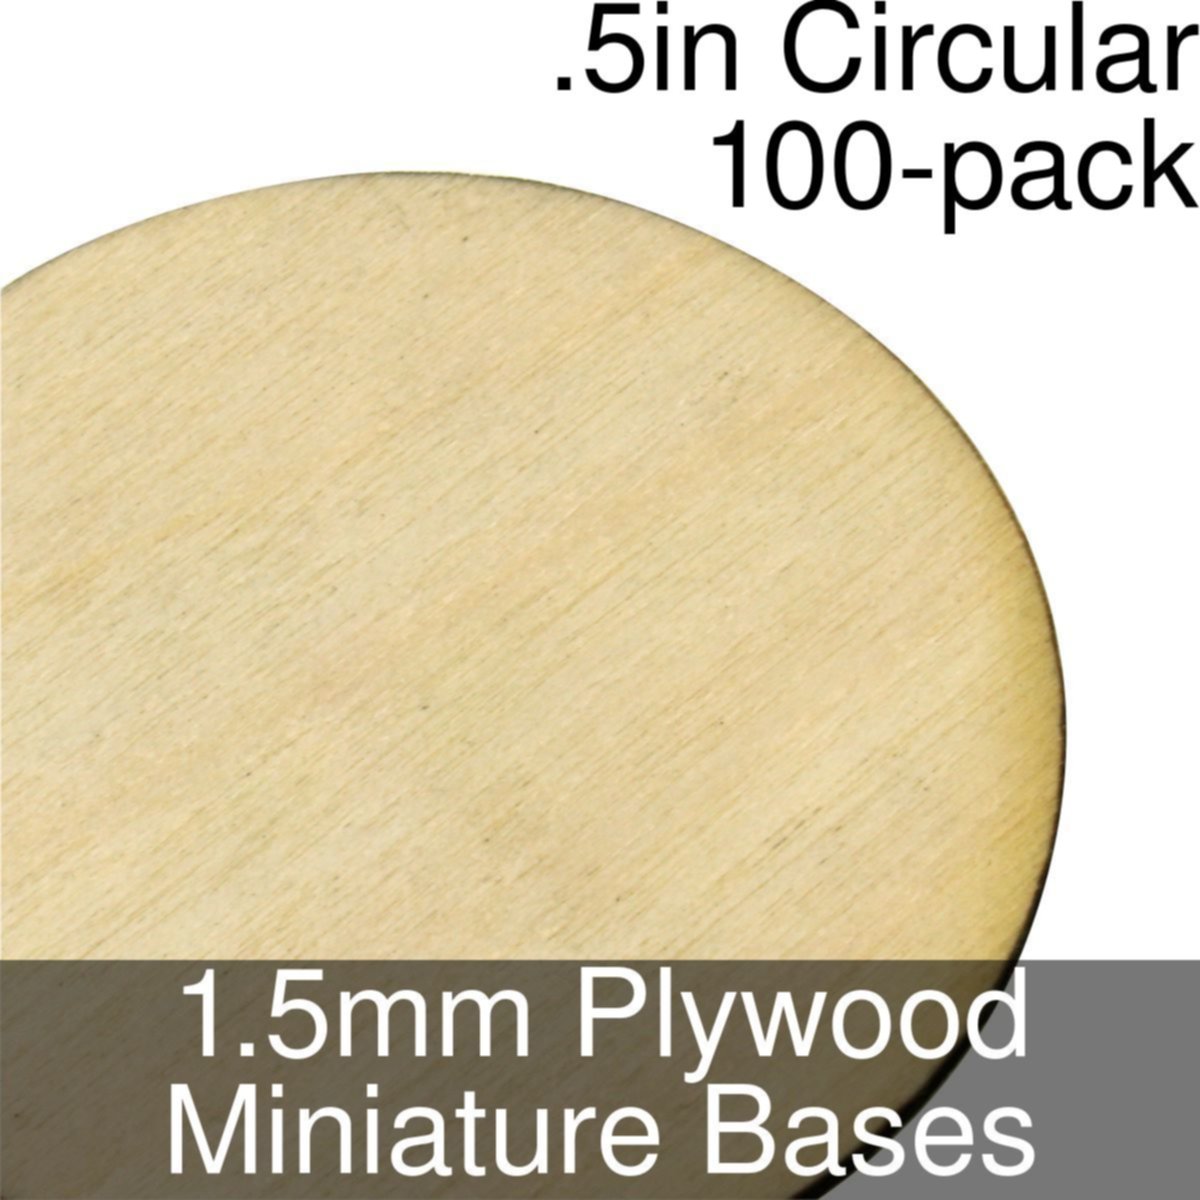 0.5-inch round miniature bases